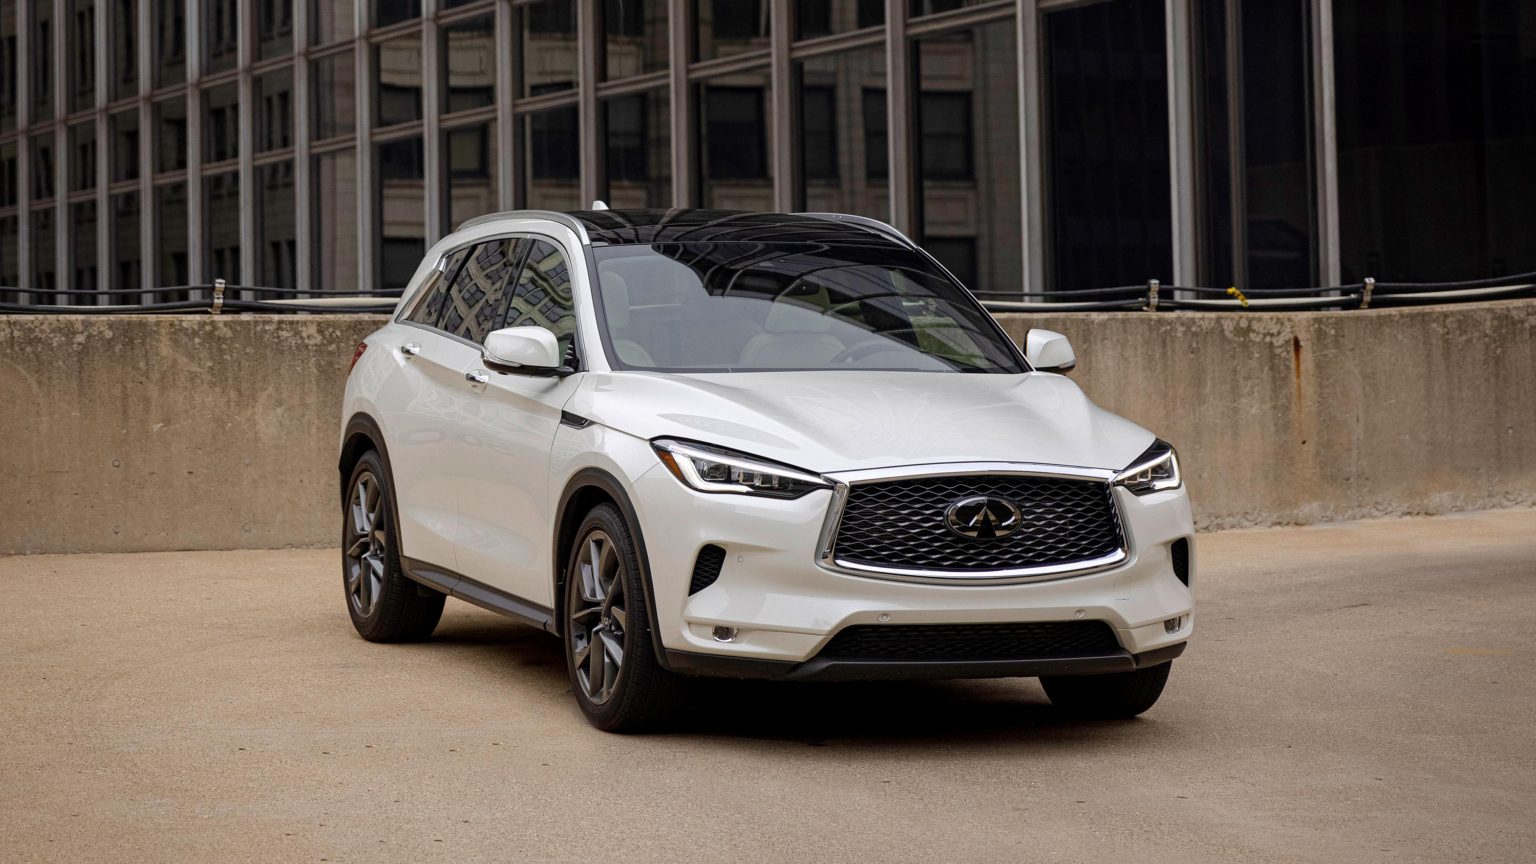 The new QX50 gets more tech and safety features.